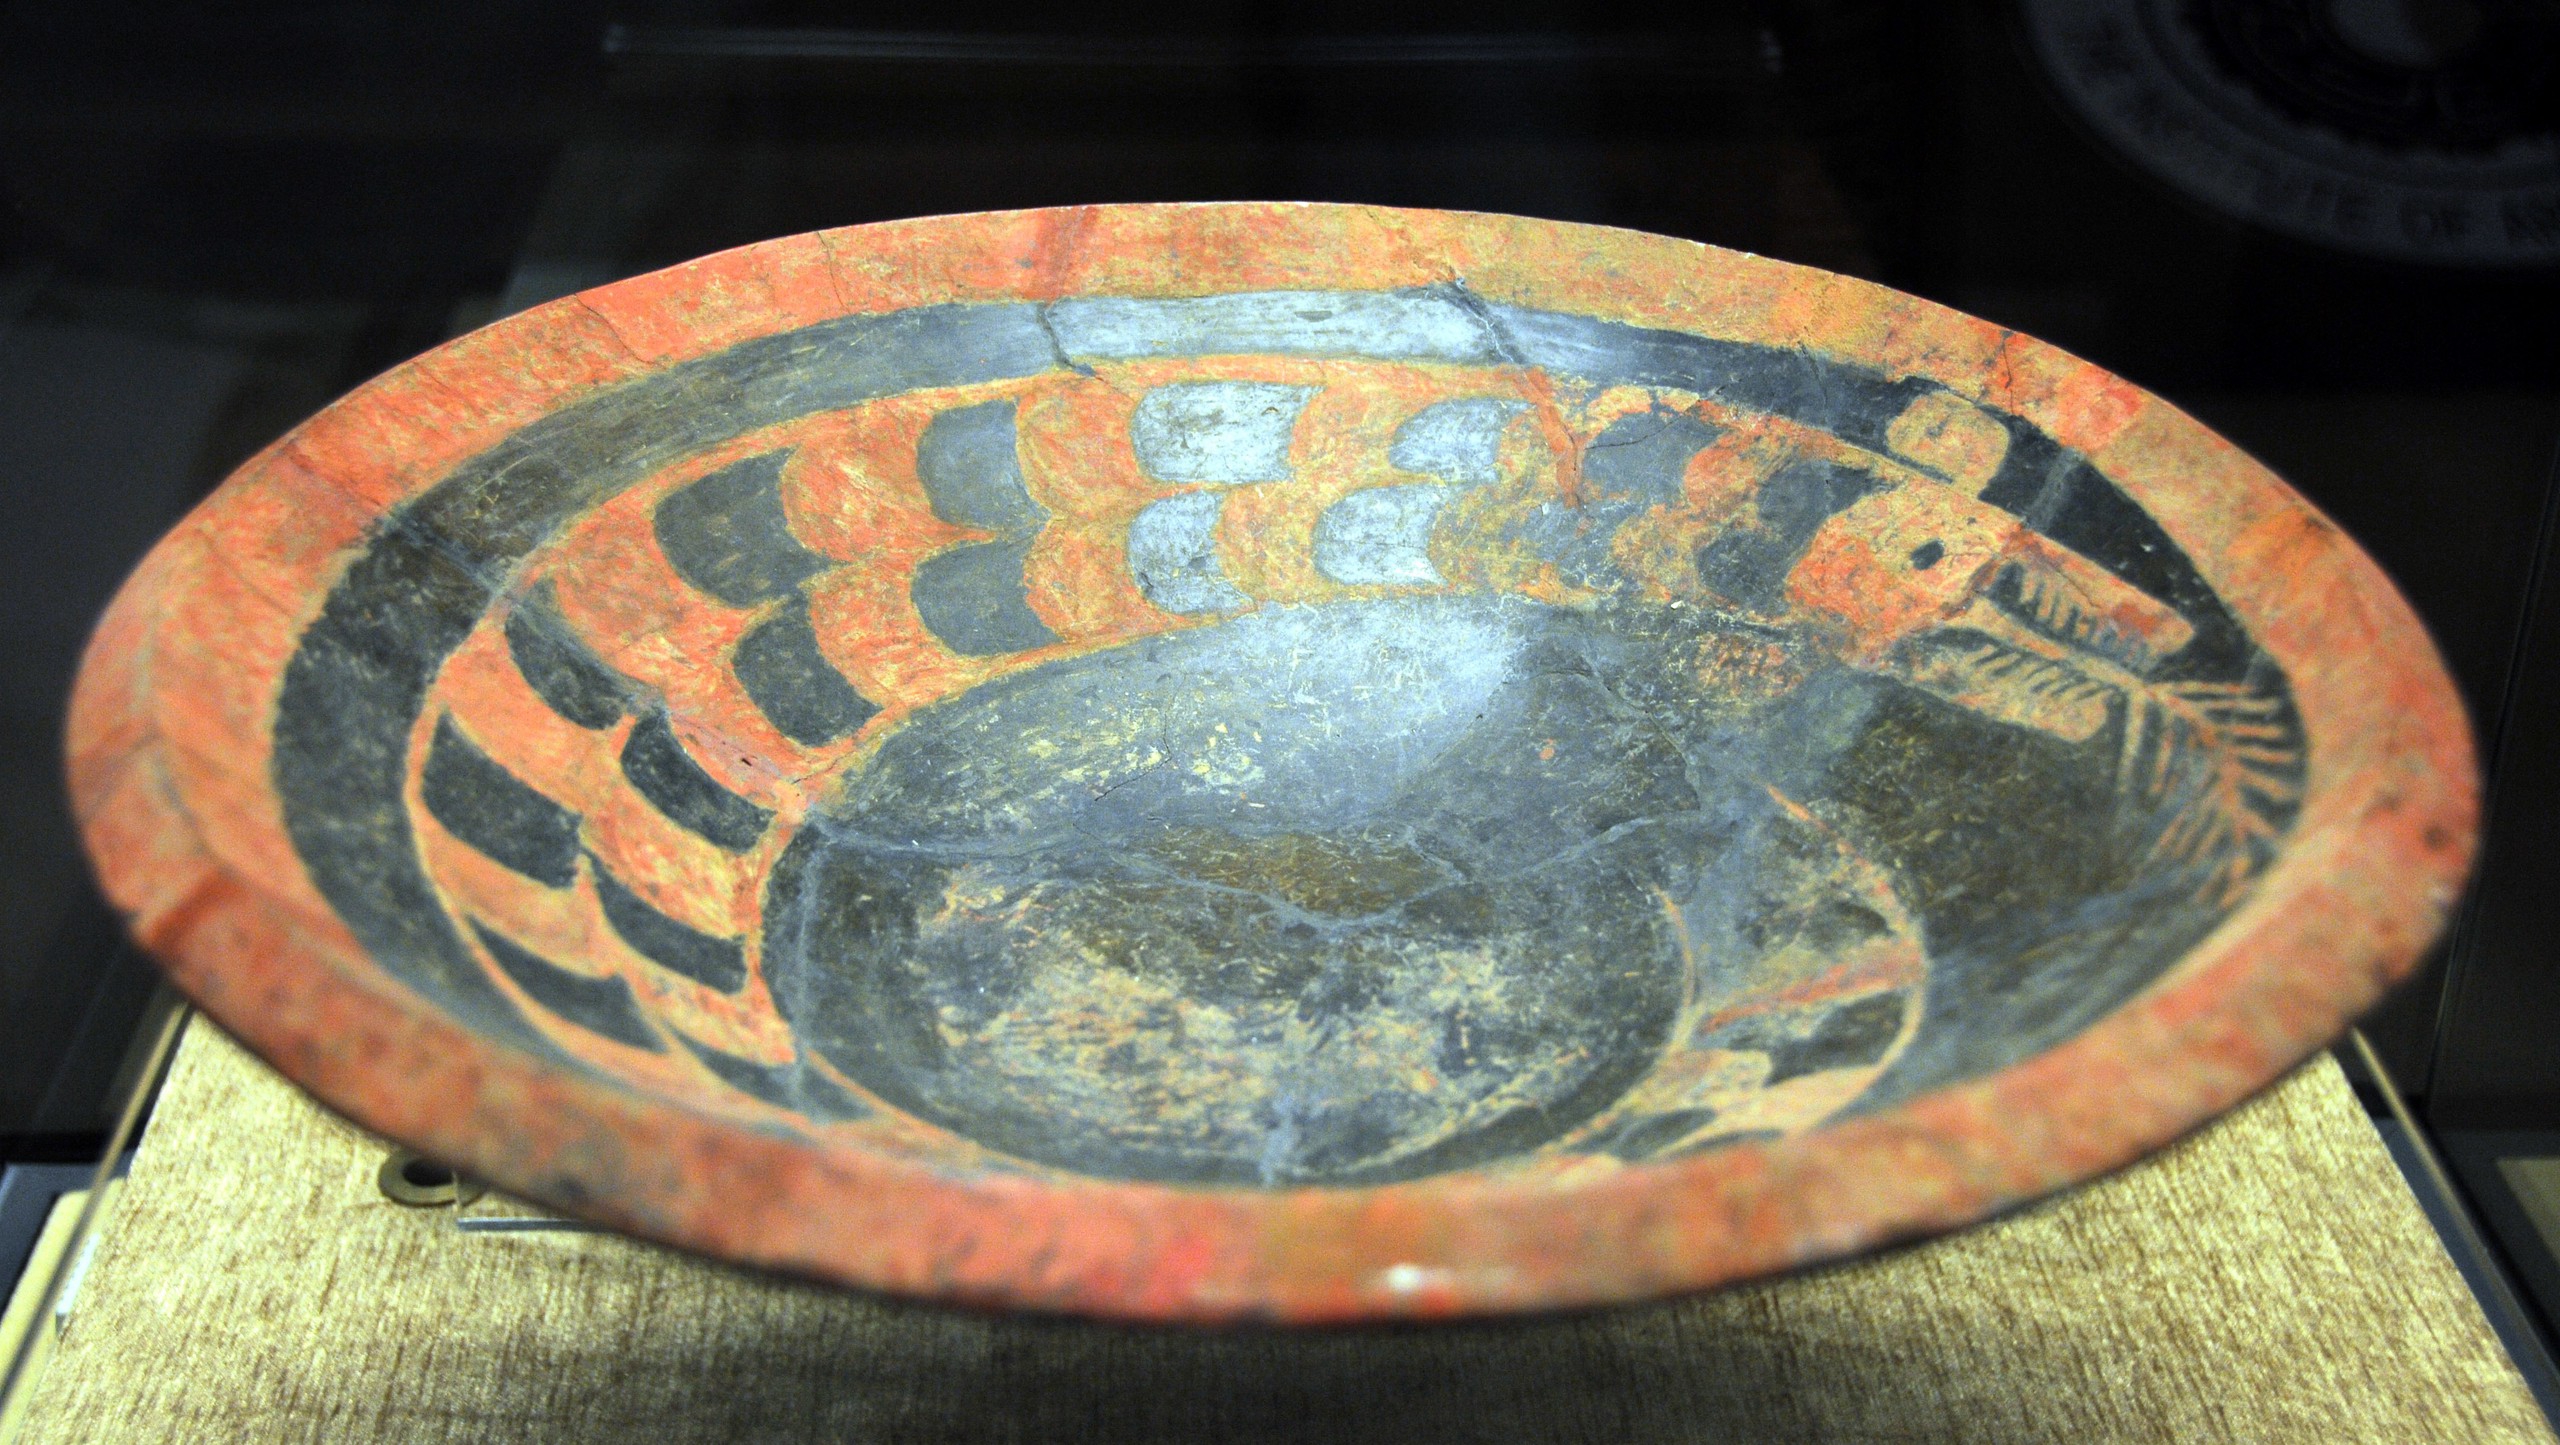 A file photo shows a painted ceramic plate featuring the image of a loong discovered in 1980 at the Taosi site in Xiangfen, Shanxi Province. /IC